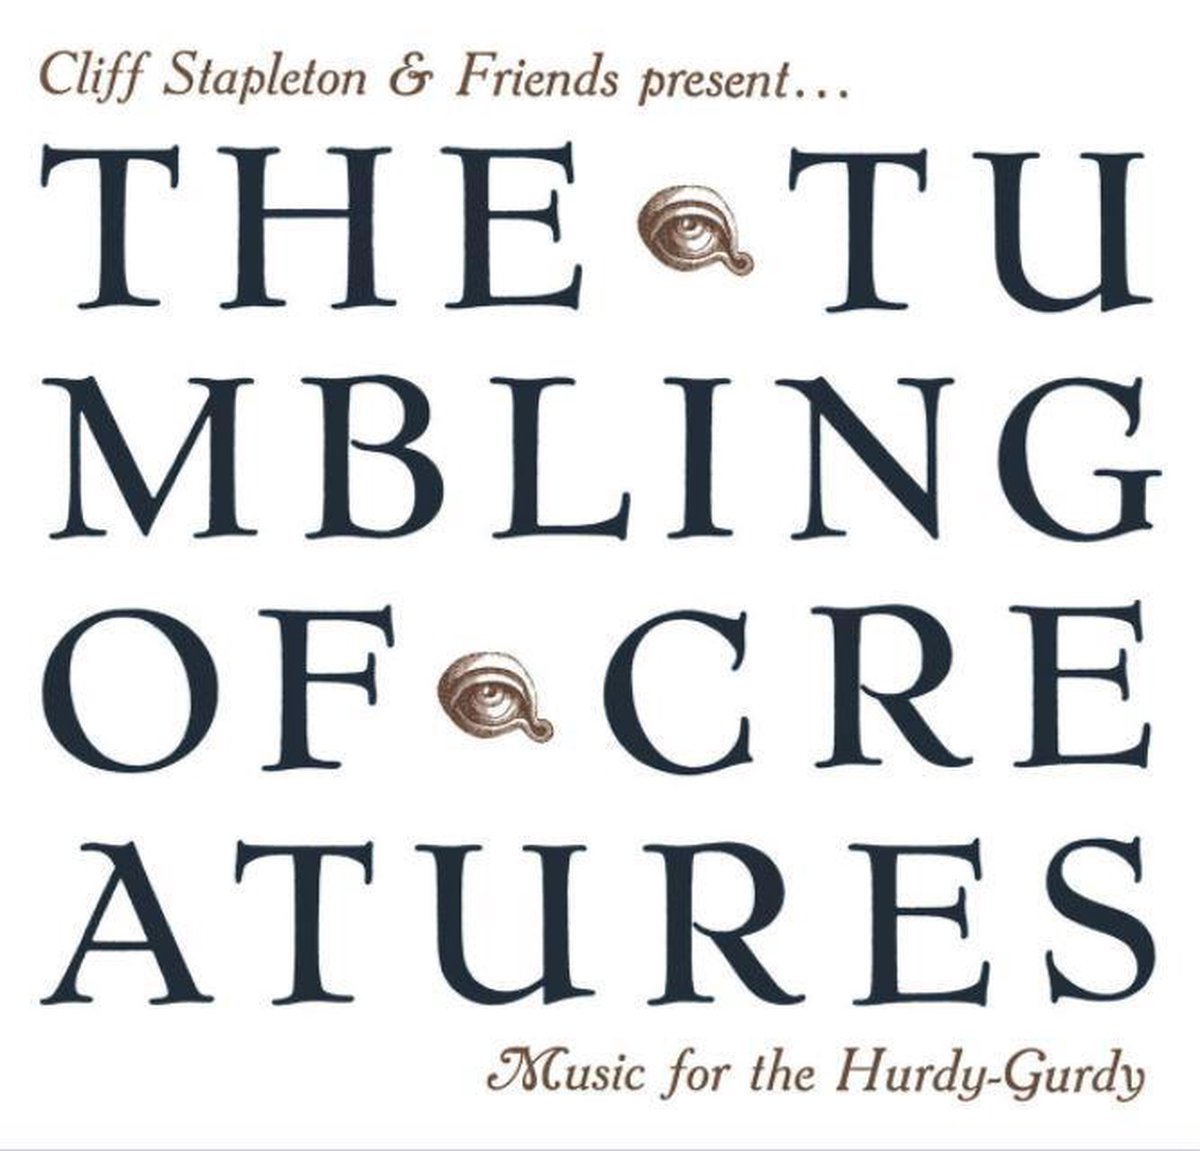 Tumbling of Creatures Music for the Hurdy-Gurdy - Cliff Stapleton & Friends